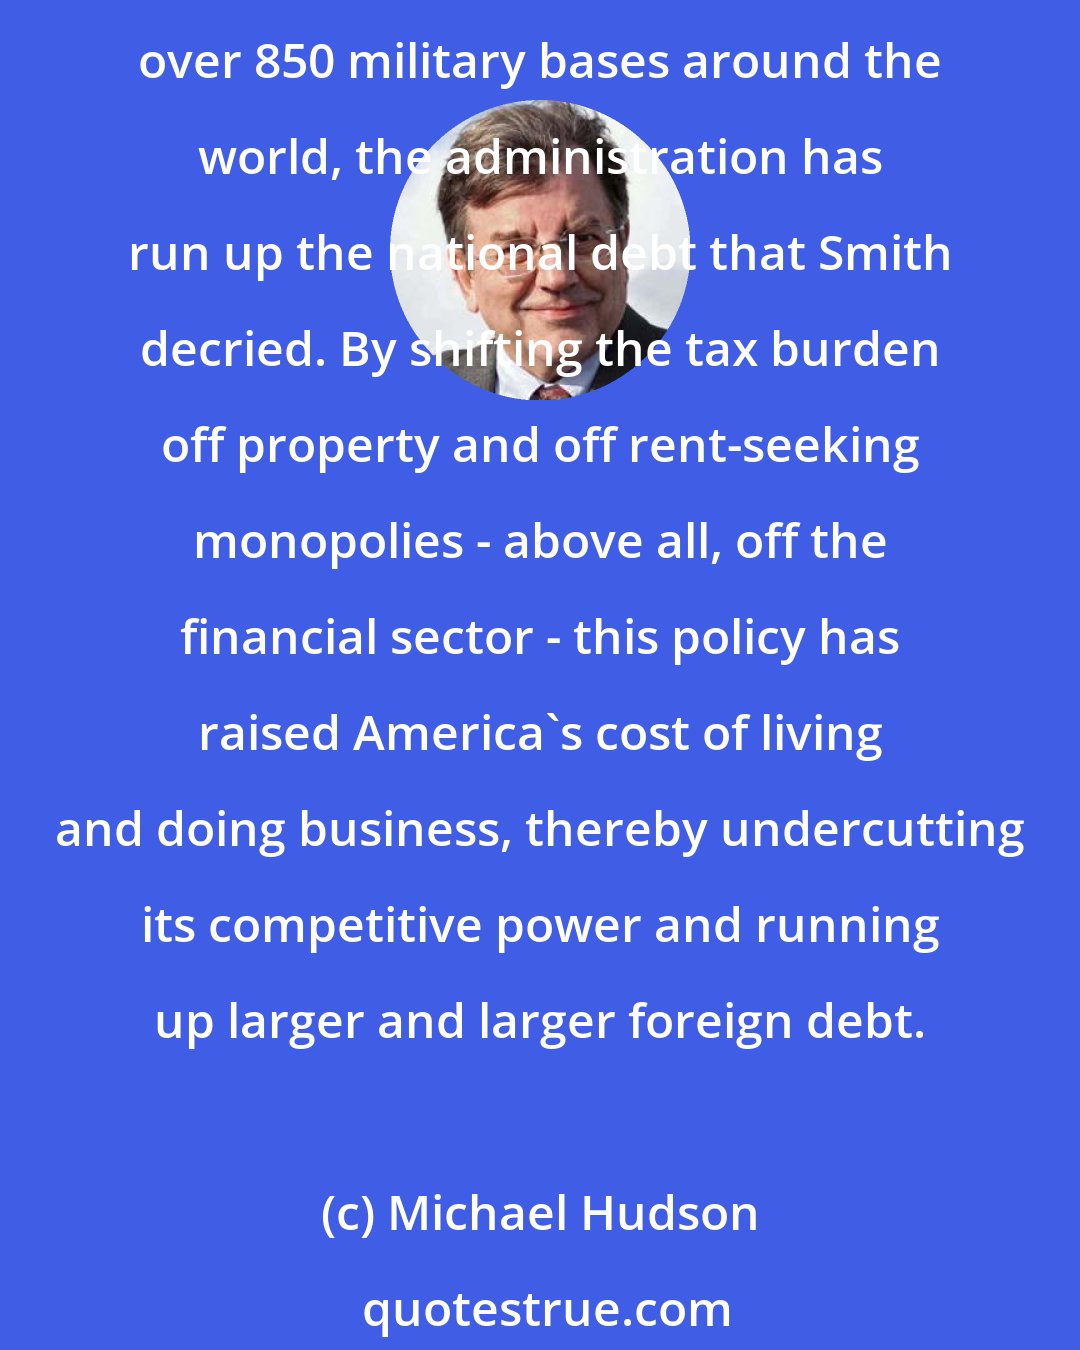 Michael Hudson: So the Bush-Obama administration has taken a fiscal stance diametrically opposed to that of the patron saint of free enterprise. While escalating war in Afghanistan and maintaining over 850 military bases around the world, the administration has run up the national debt that Smith decried. By shifting the tax burden off property and off rent-seeking monopolies - above all, off the financial sector - this policy has raised America's cost of living and doing business, thereby undercutting its competitive power and running up larger and larger foreign debt.